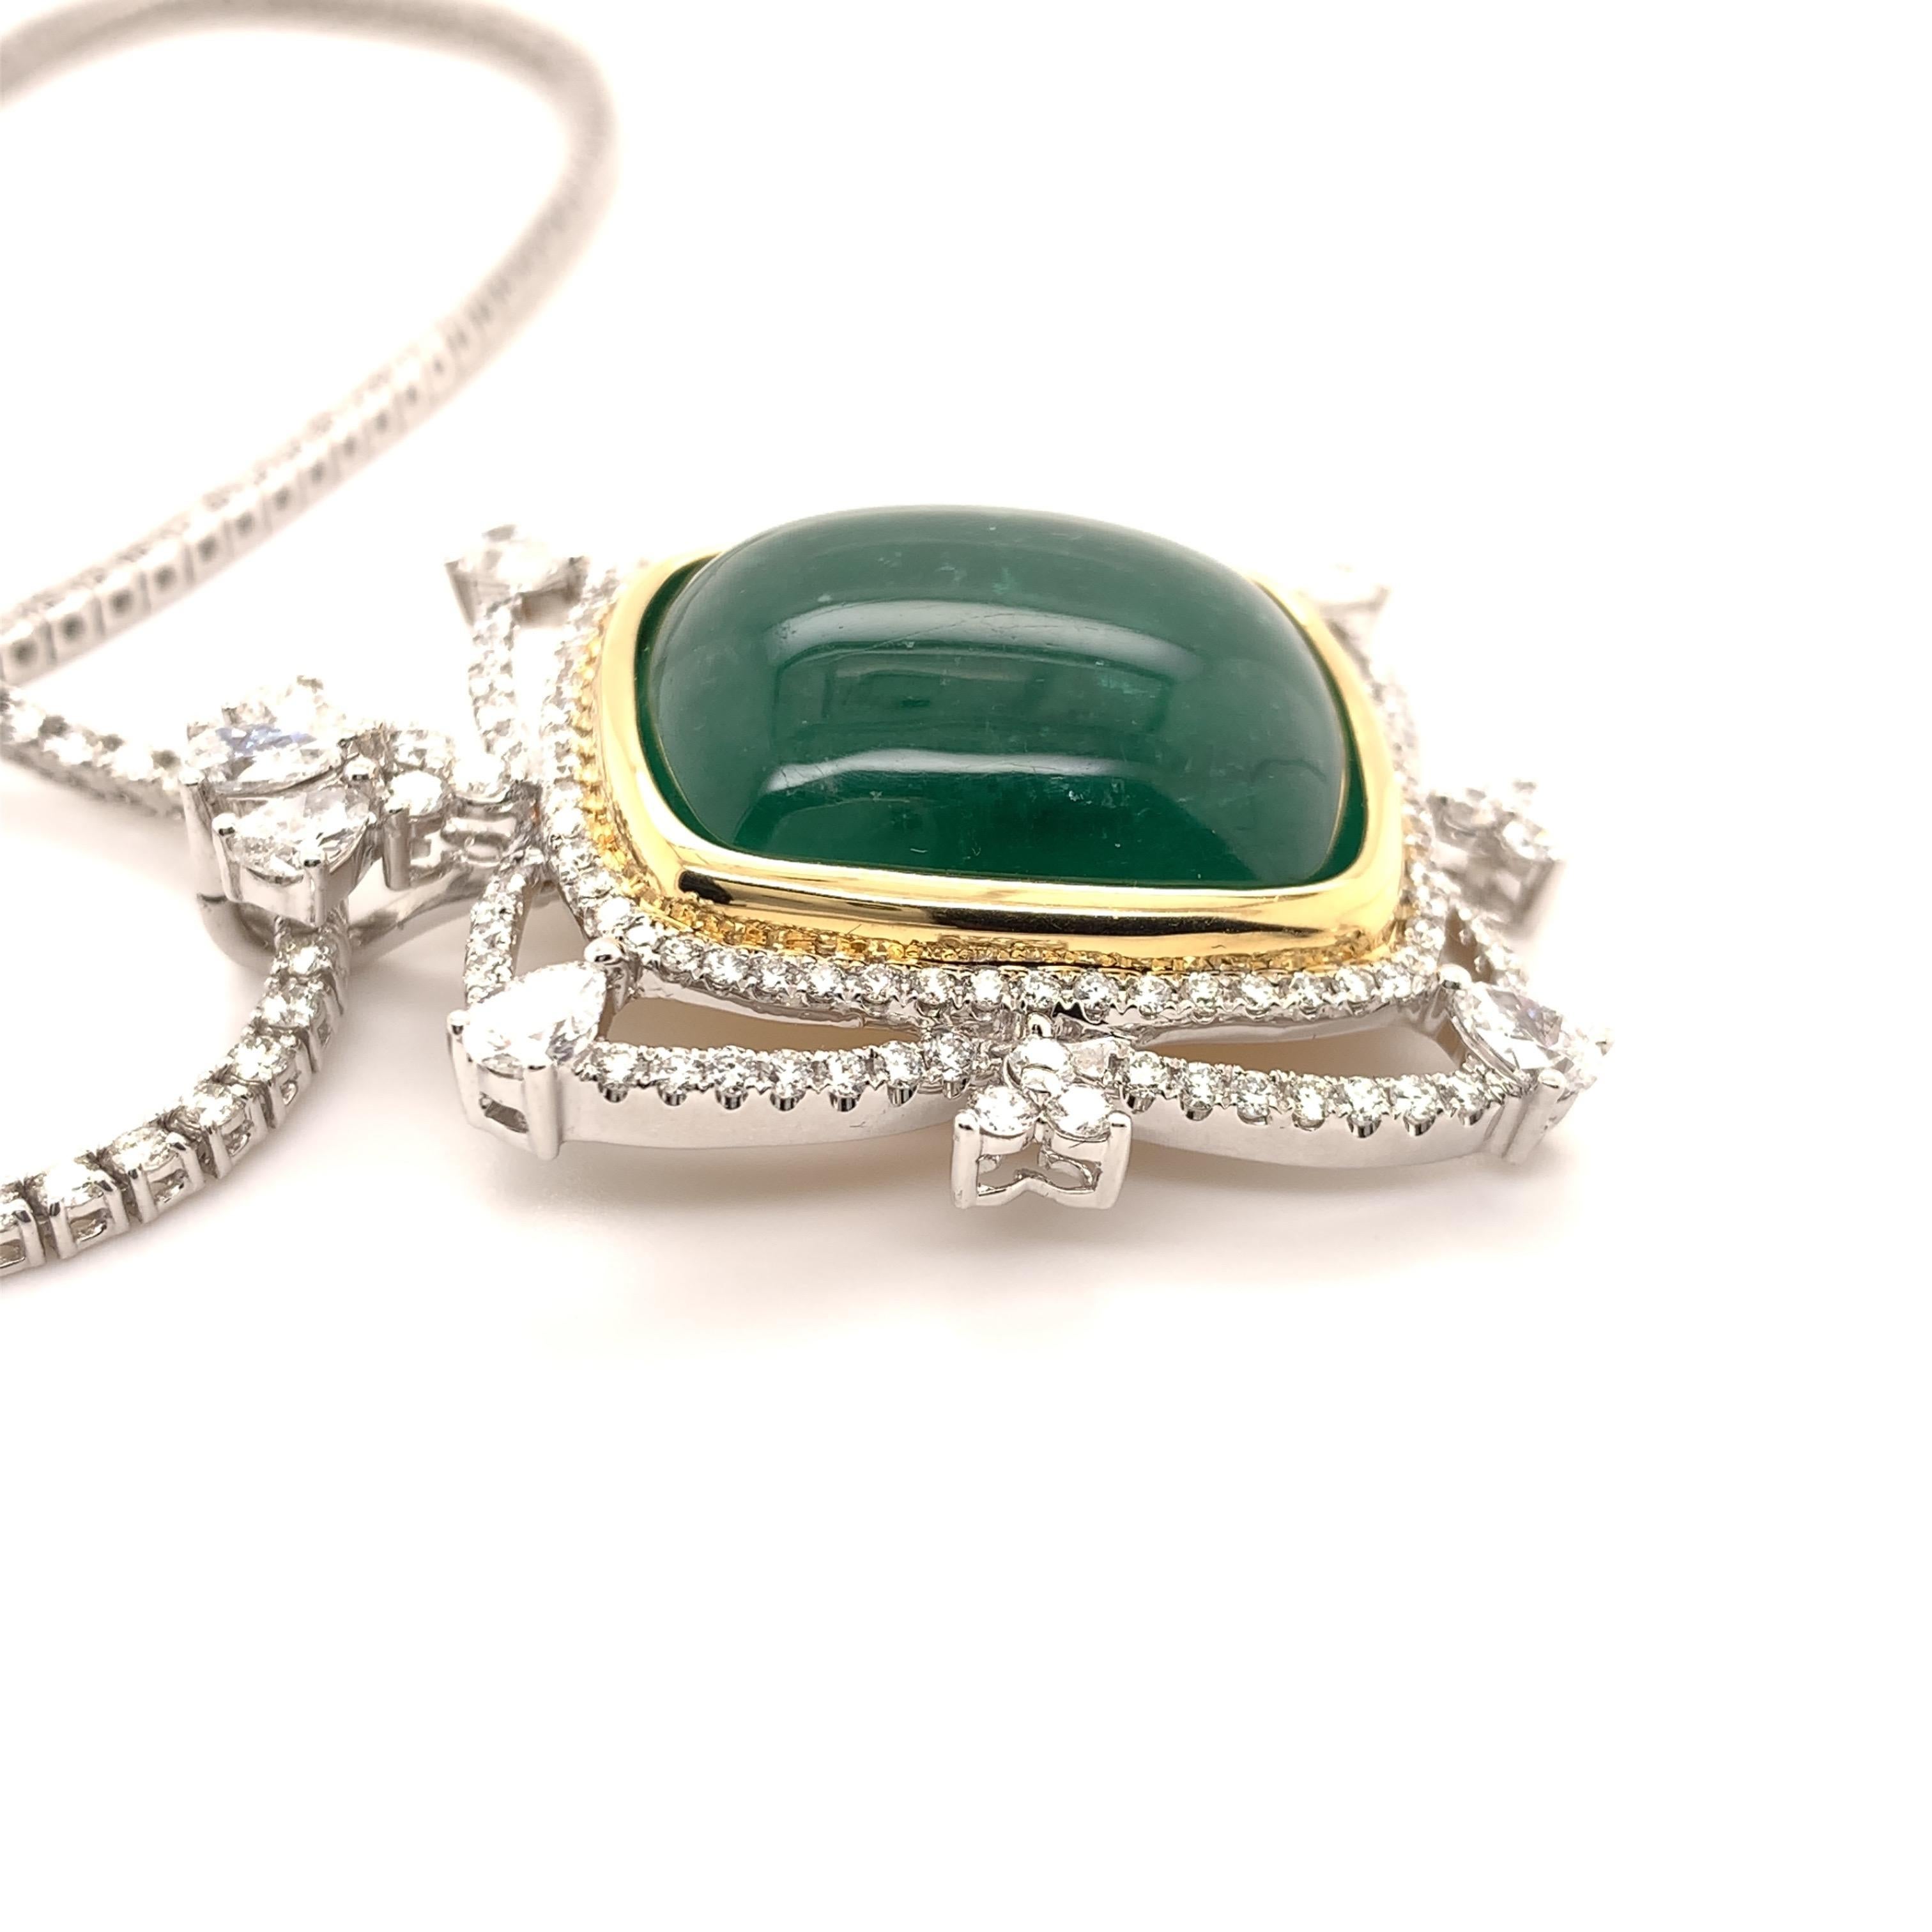 Elegant emerald diamond necklace. Rich green, Colombian, 32.63 carats natural cabochon emerald encased in a yellow gold bezel setting, accented with pear shape and round brilliant cut diamonds. Handcrafted masterpiece design set in 18 karats